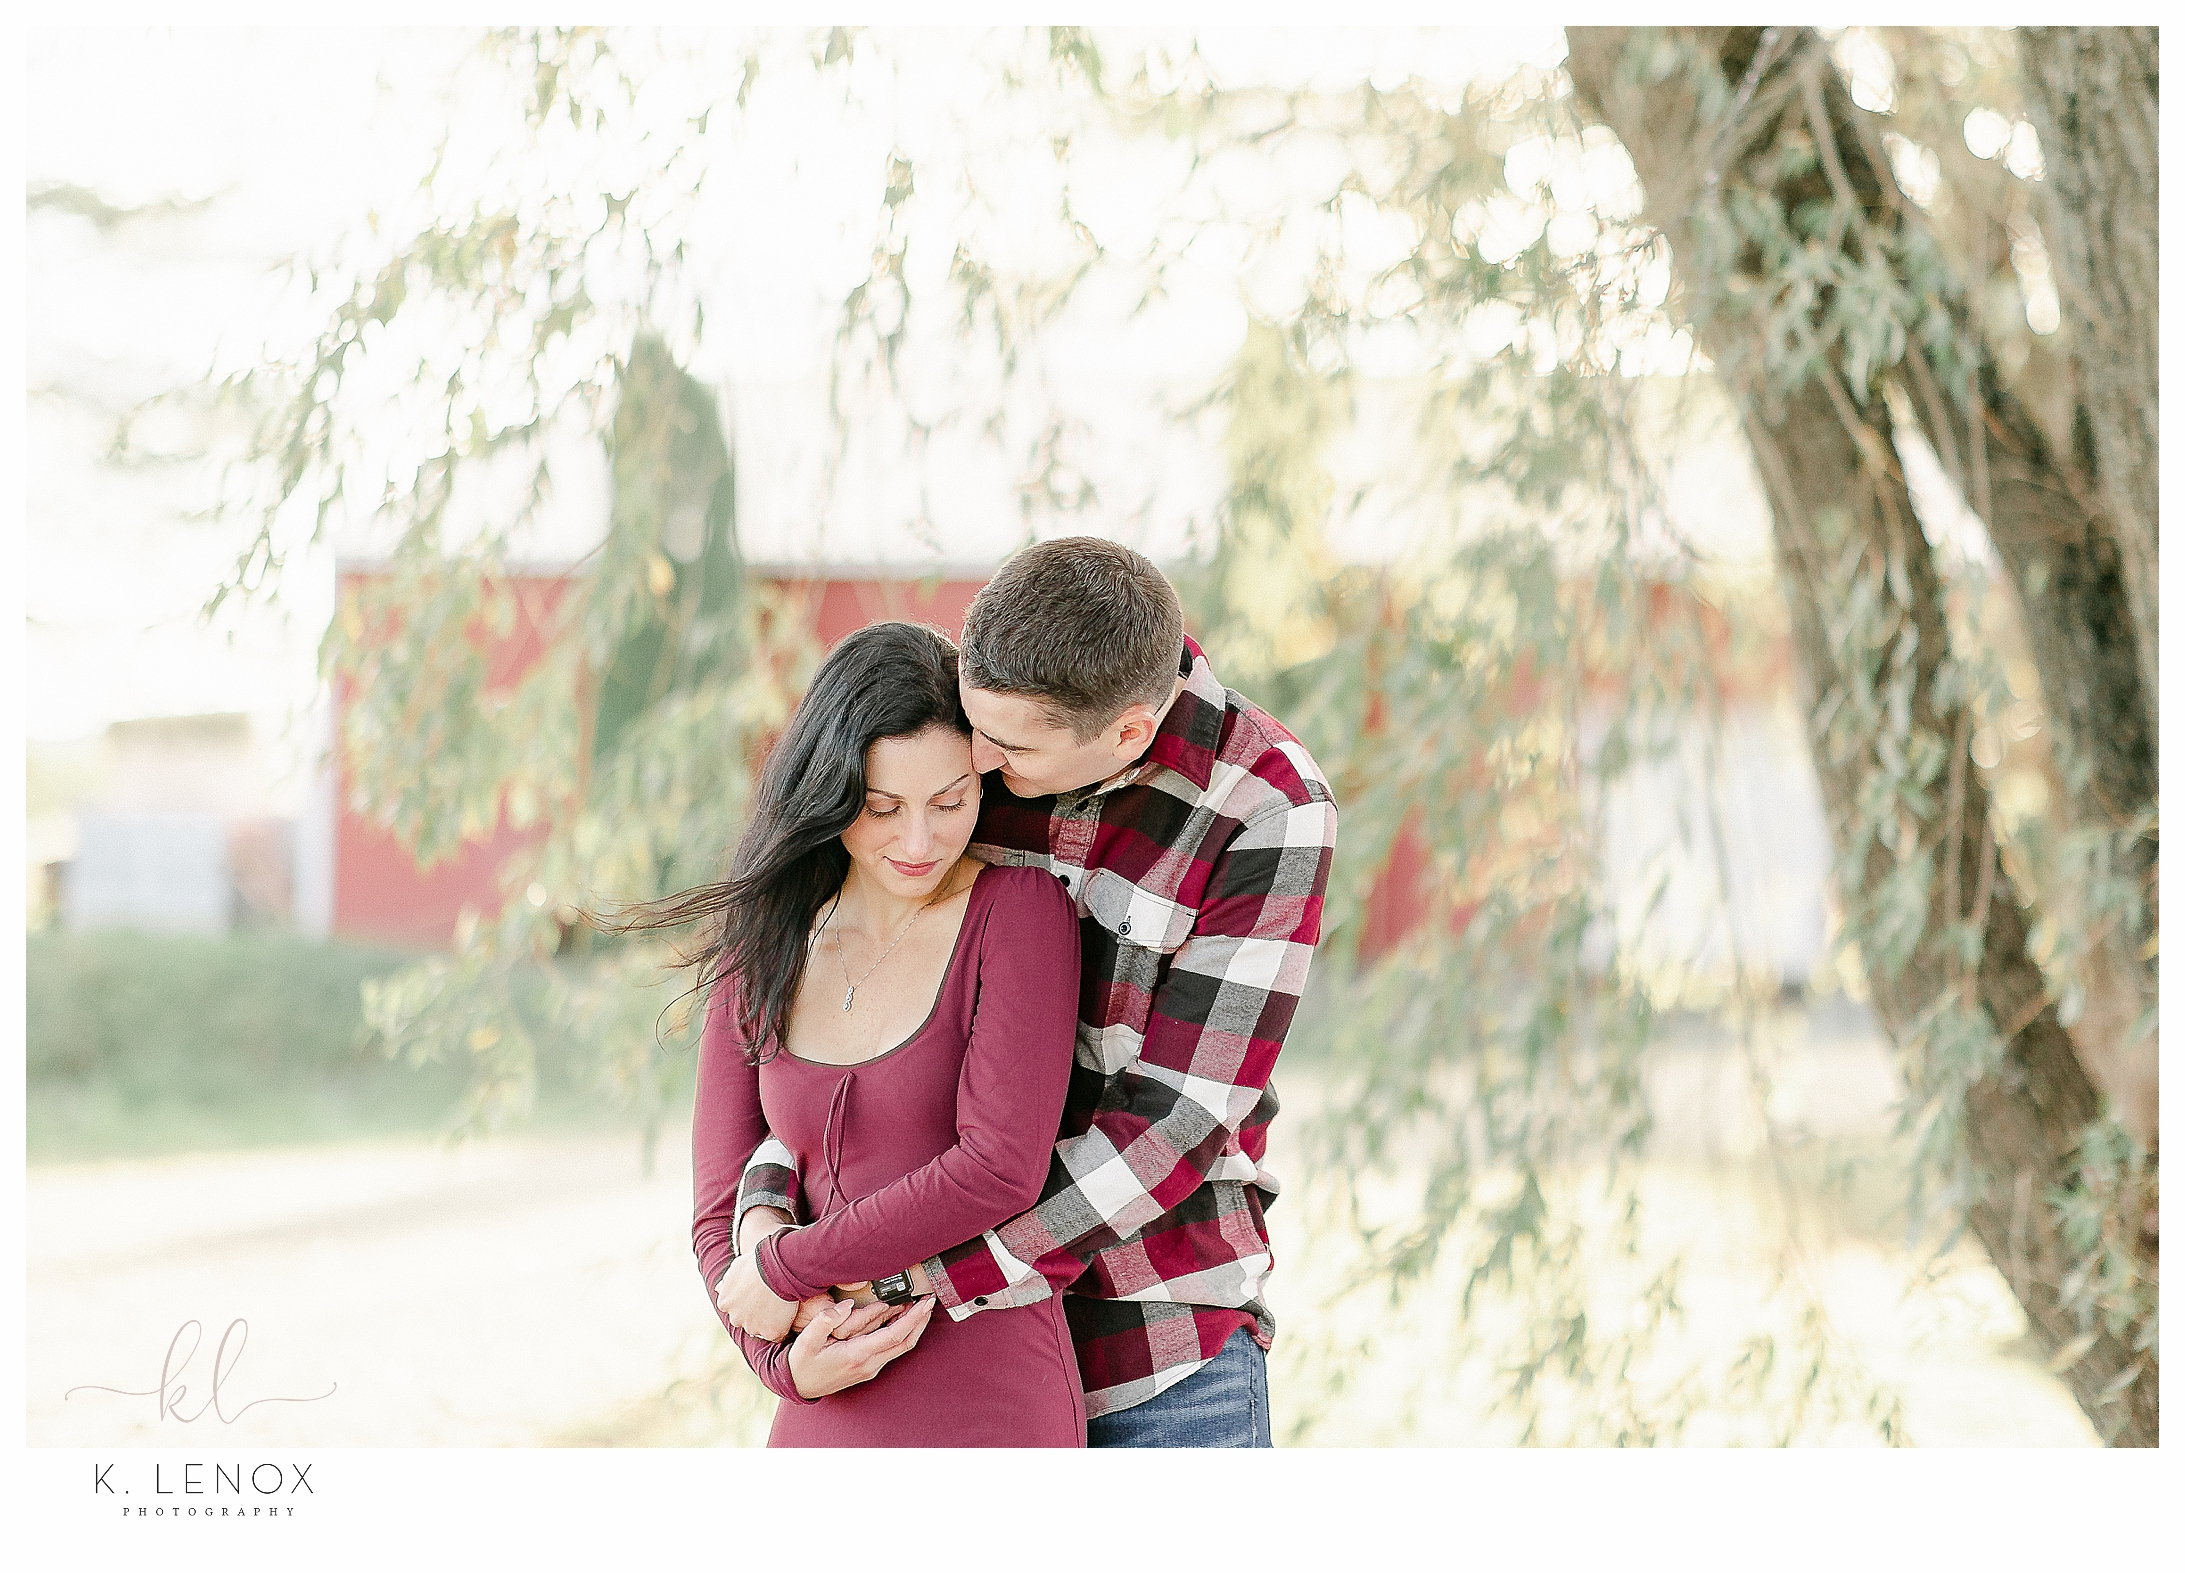 Fun and Carefree Engagement Session in NH- Light and Airy photo of a man hugging his fiance